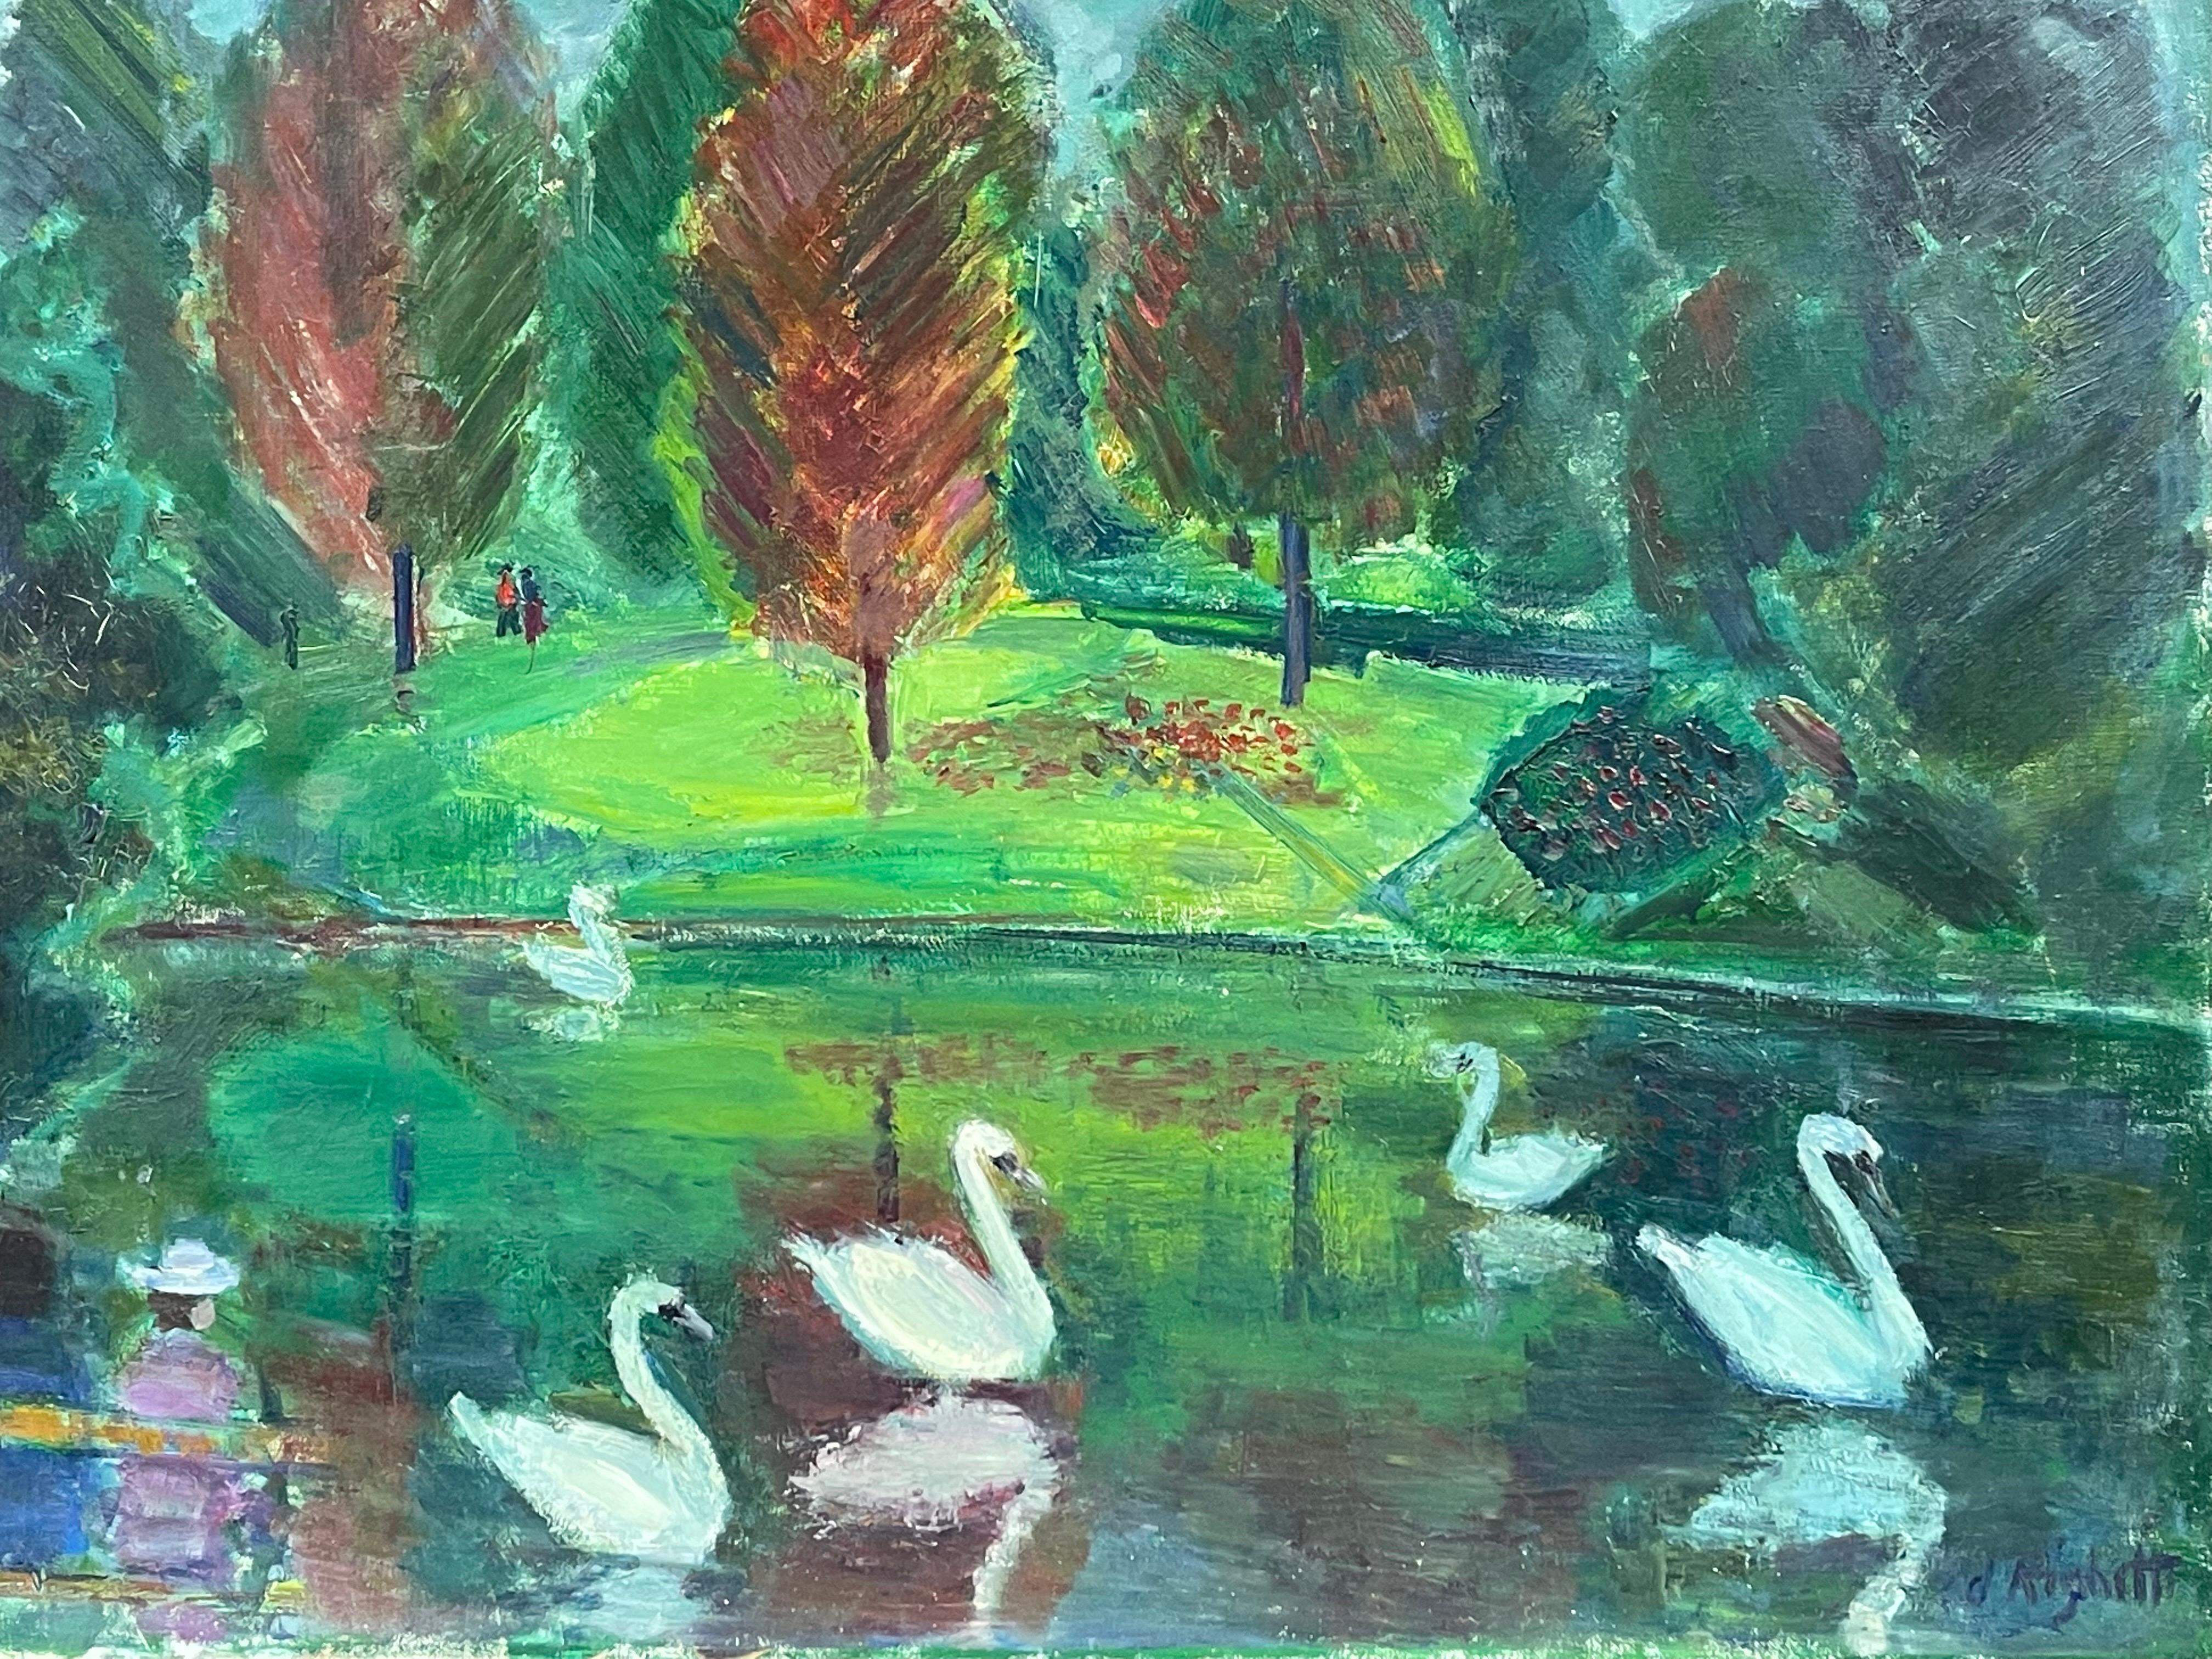 Édouard Righetti (1924-2001) Landscape Painting - Original French Mid Century Oil - Vibrant Green Lake With Elegant Swans